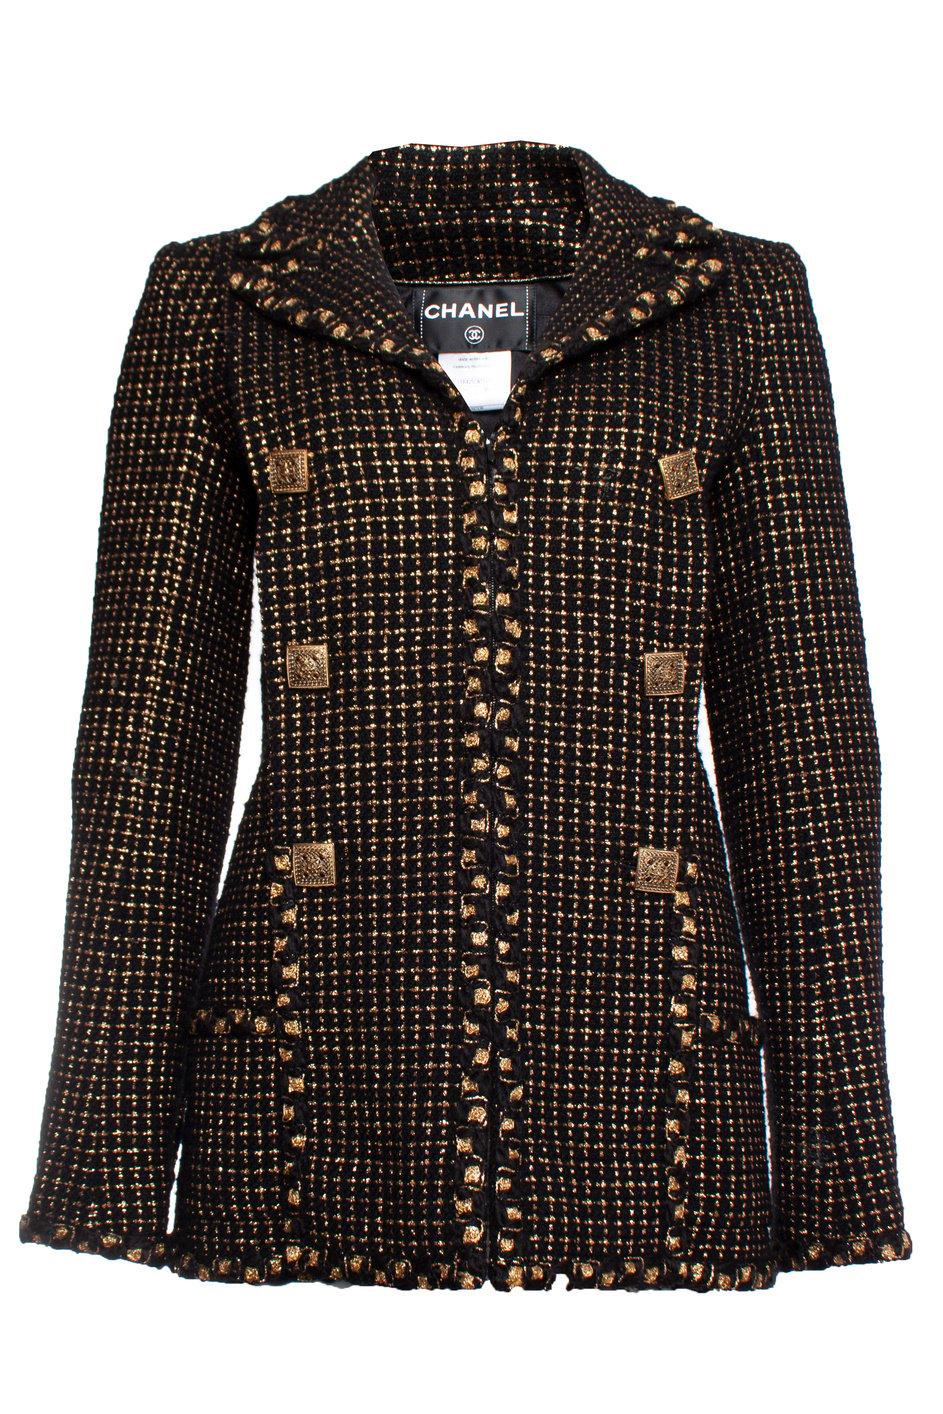 Chanel New Icon Paris / Byzance Black Tweed Jacket For Sale 4